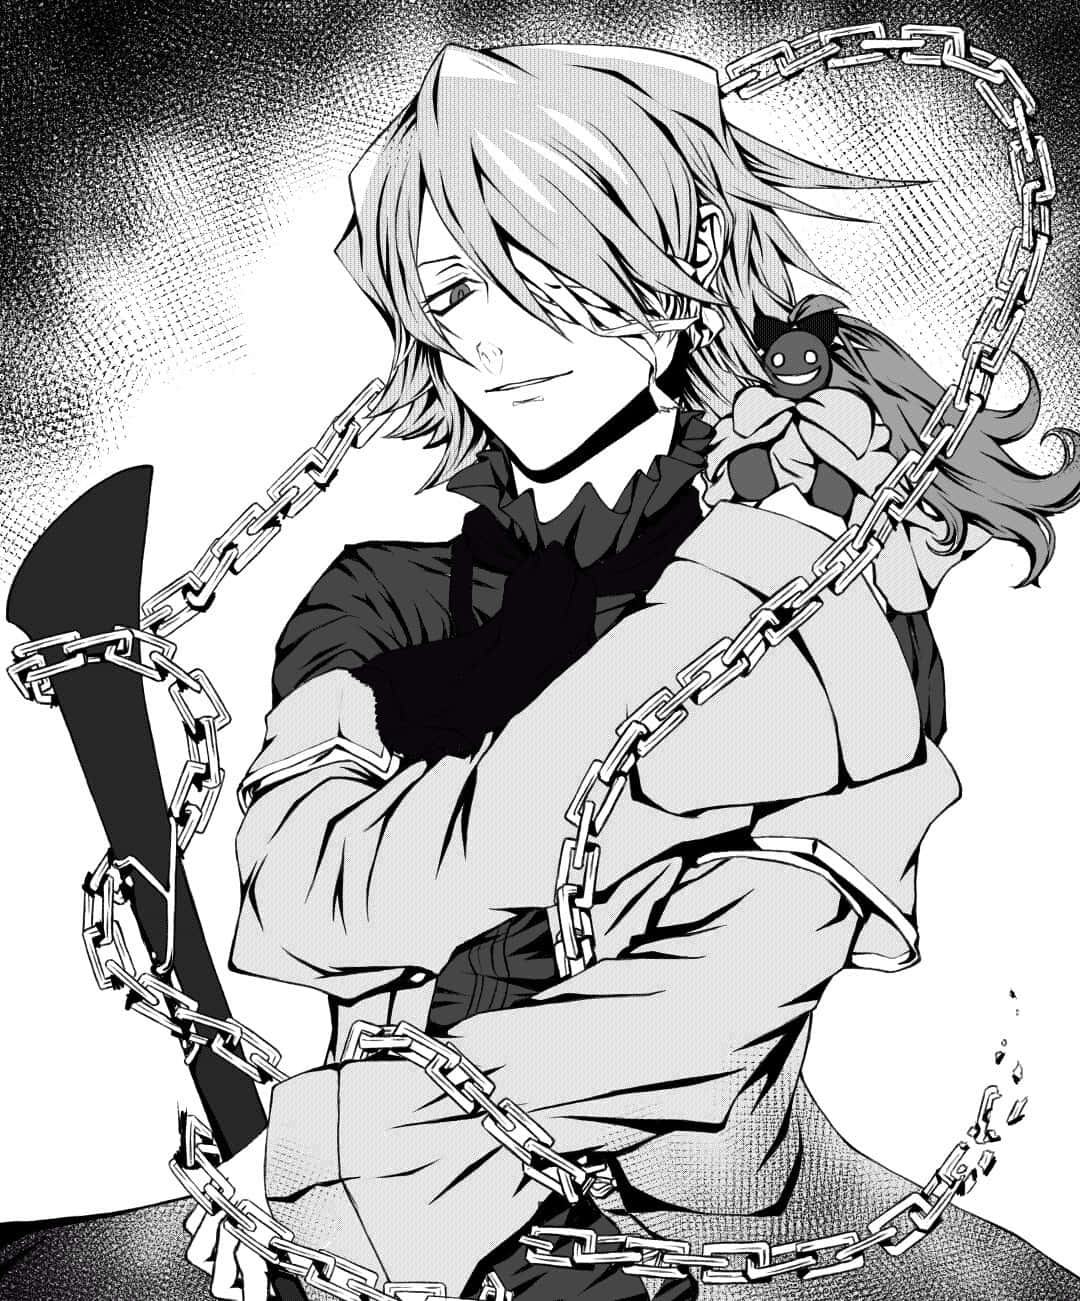 Xerxes Break, The Beloved Character From Pandora Hearts In An Impressive Illustration. Wallpaper